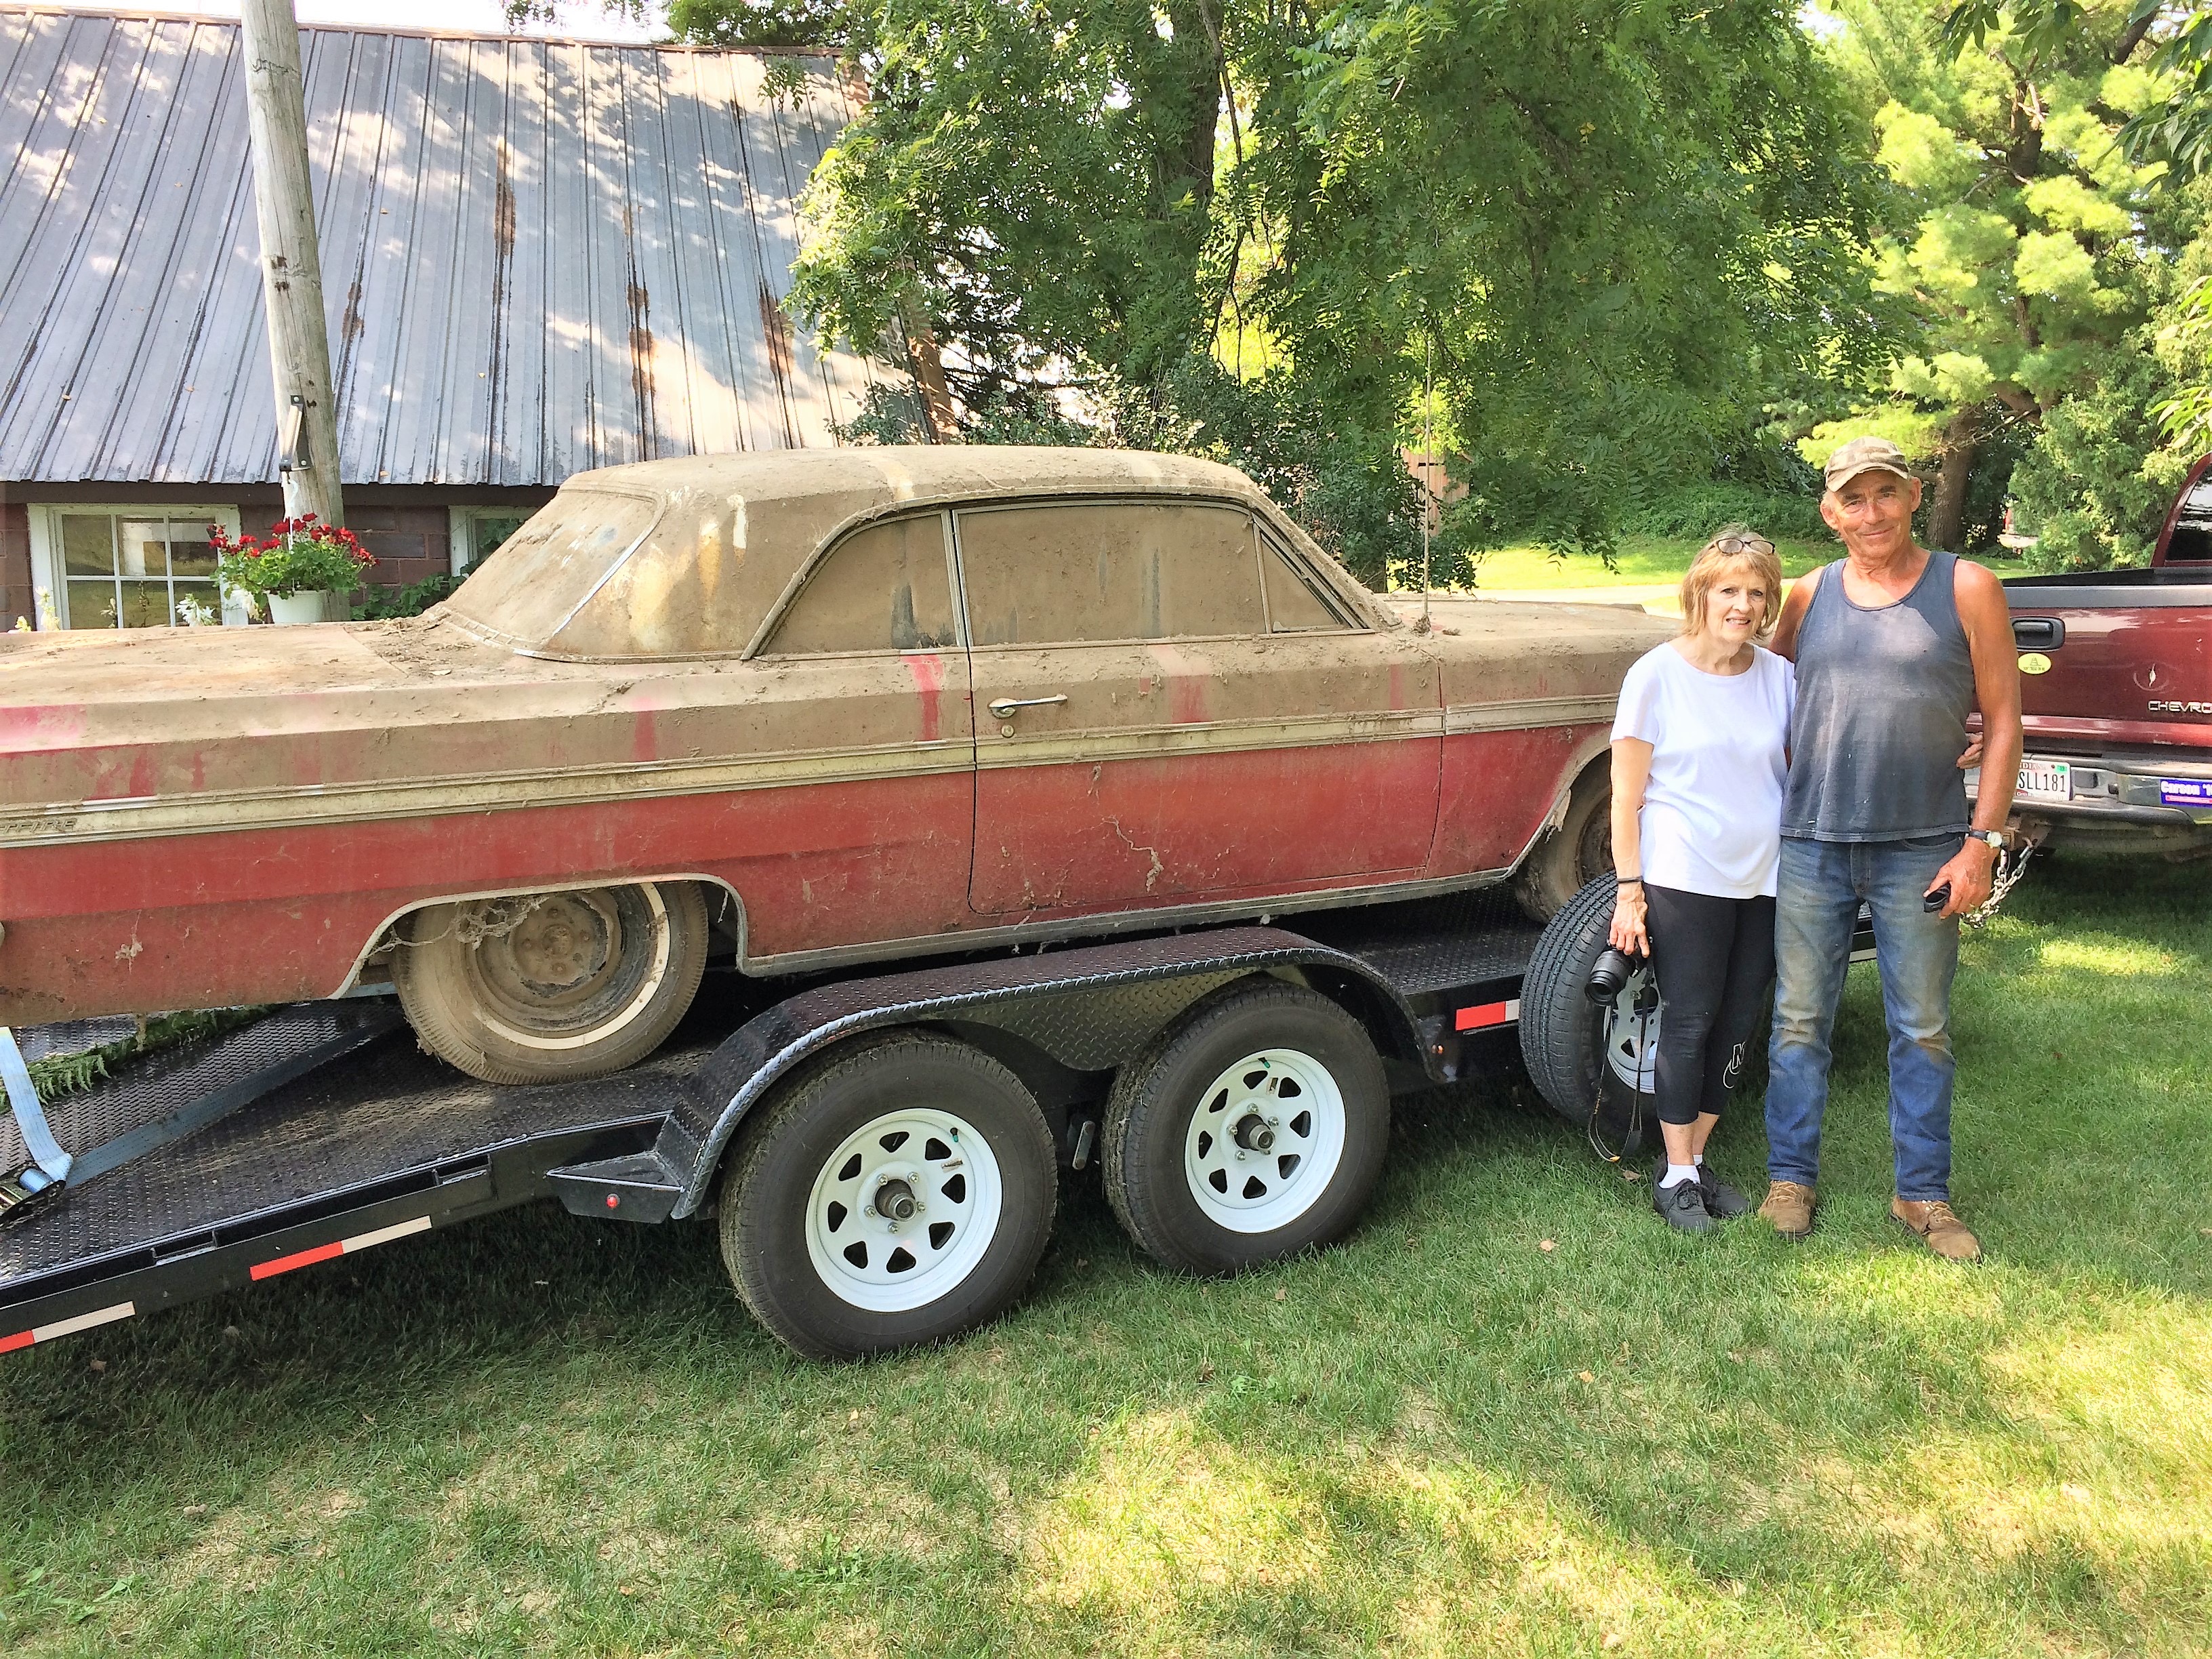 Barn-found, Family fascination leads to barn-found Oldsmobile Jetfire, ClassicCars.com Journal